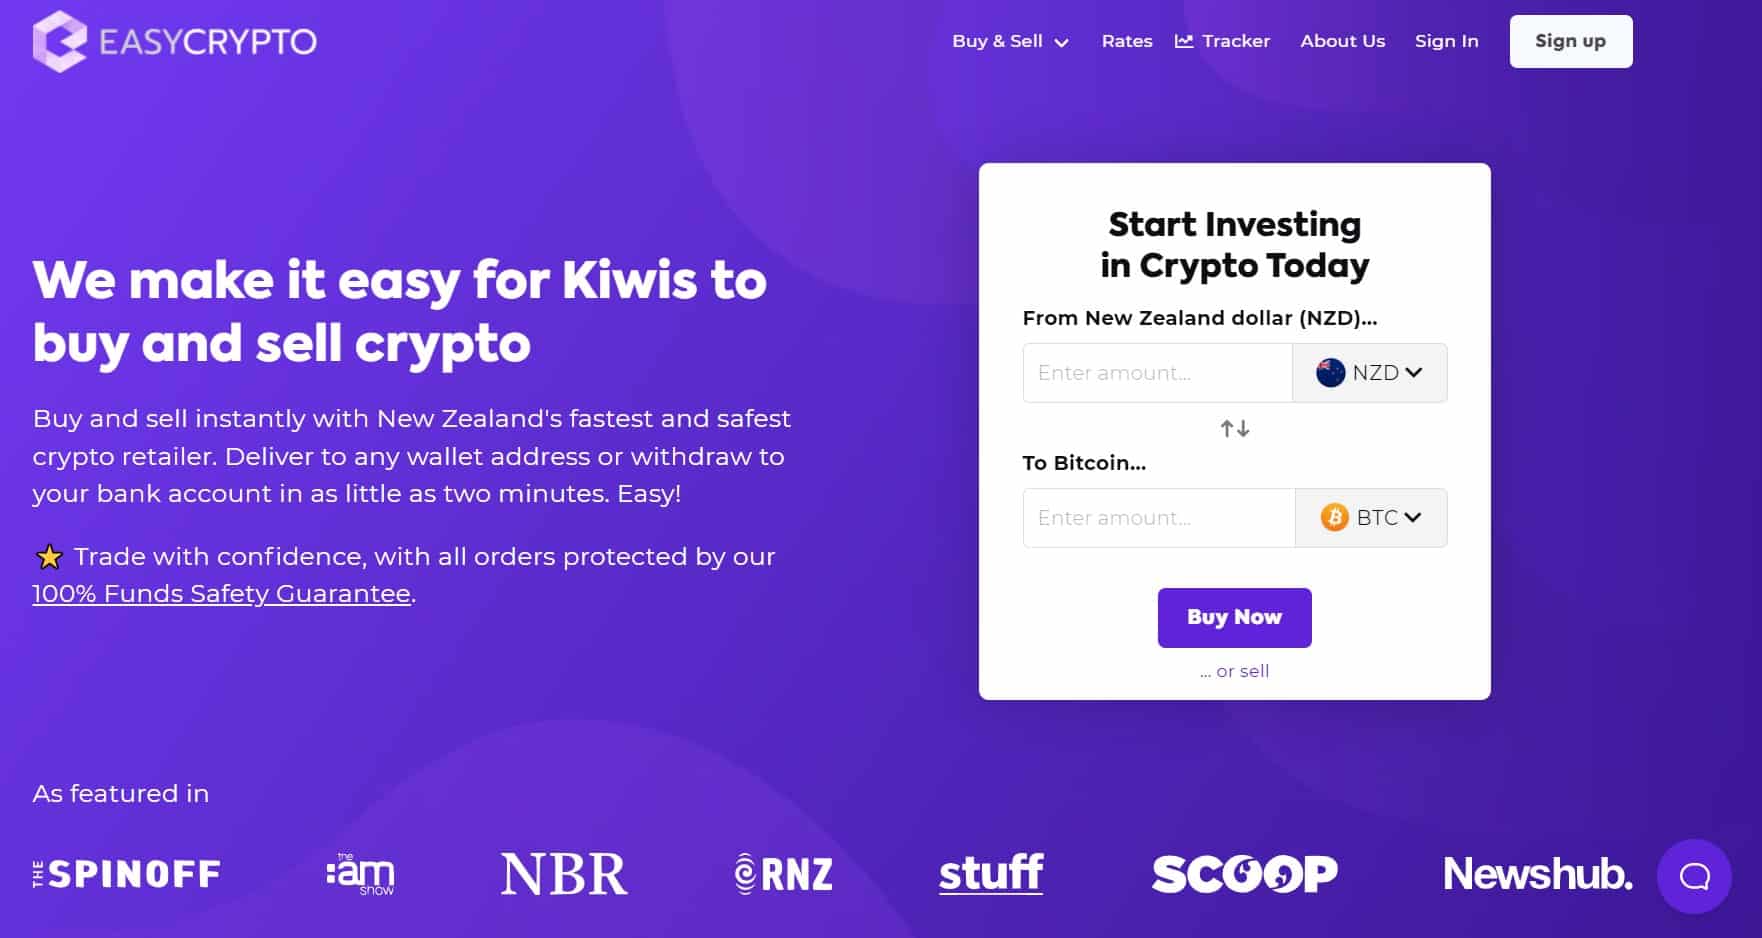 We make it easy for Kiwis to buy and sell crypto!